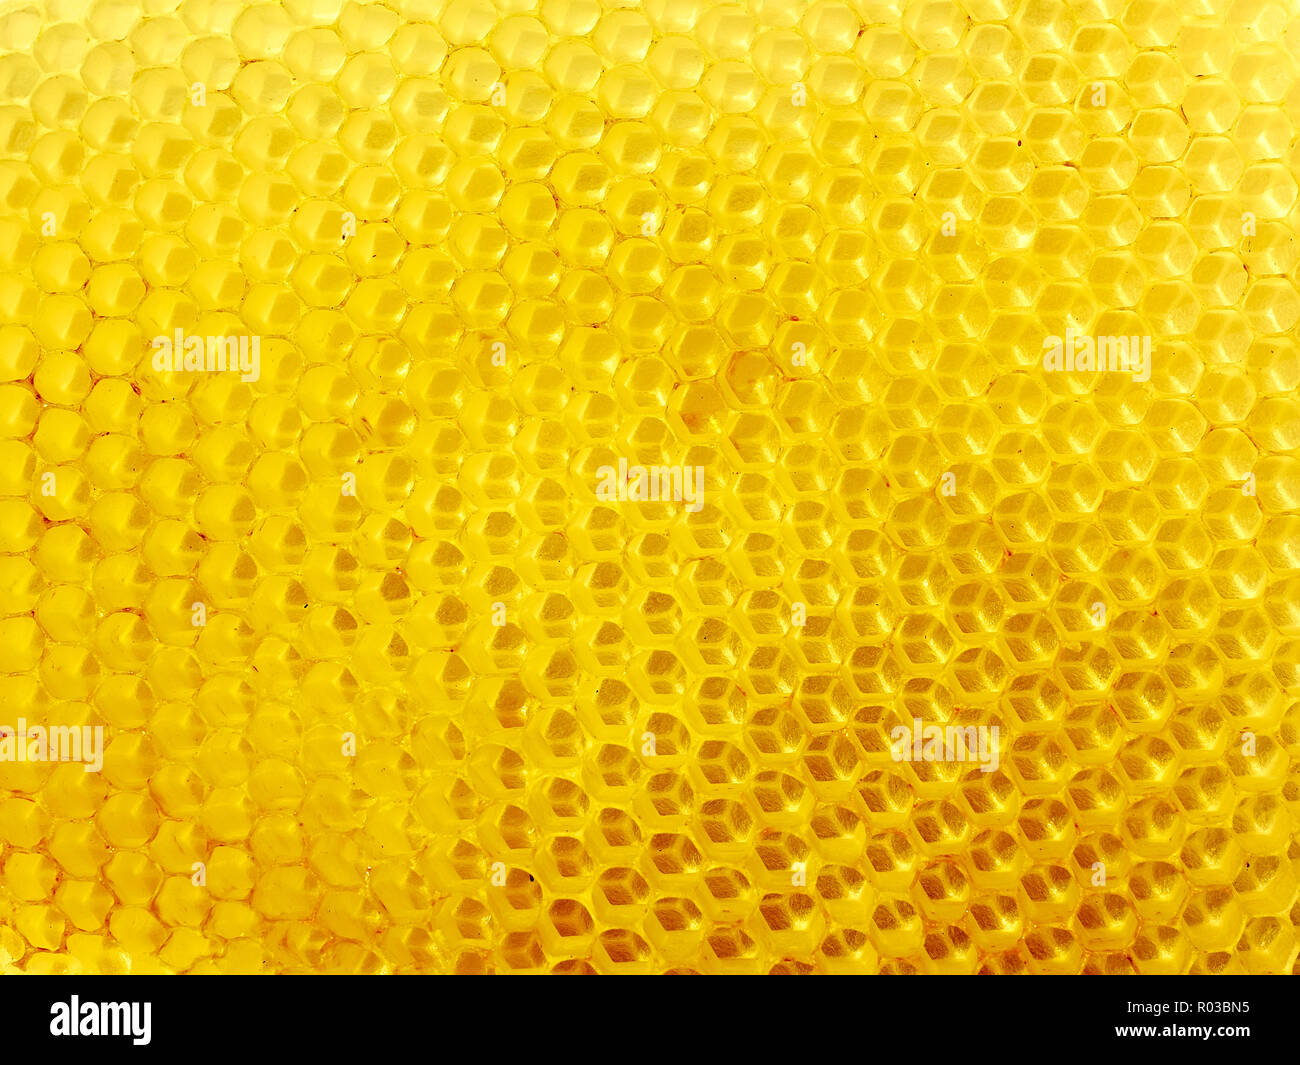 Honeycomb of fresh wax with empty cells Stock Photo